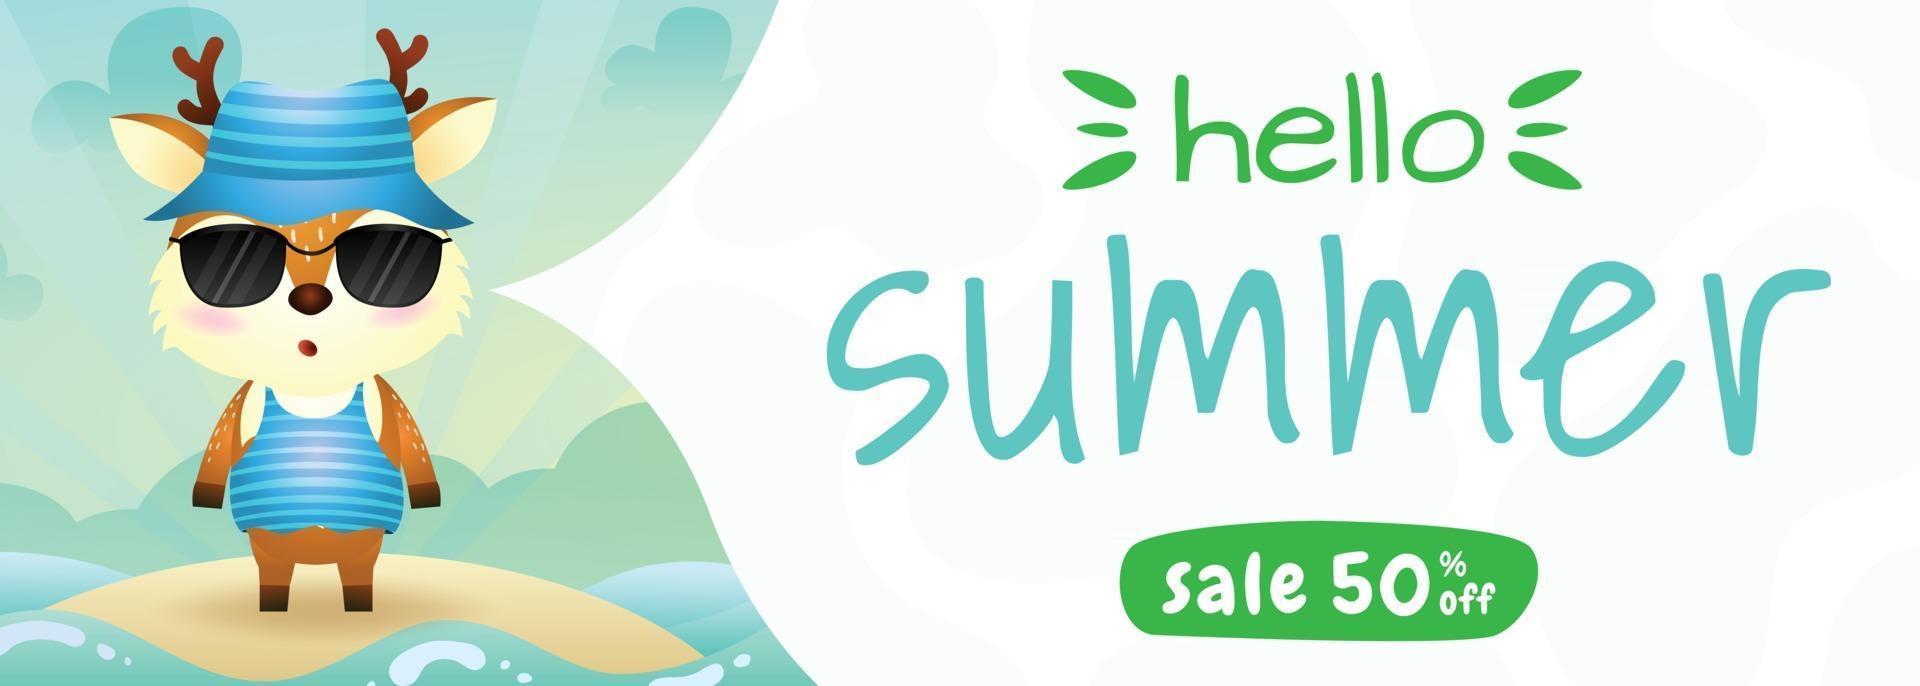 summer sale banner with a cute deer using summer costume vector